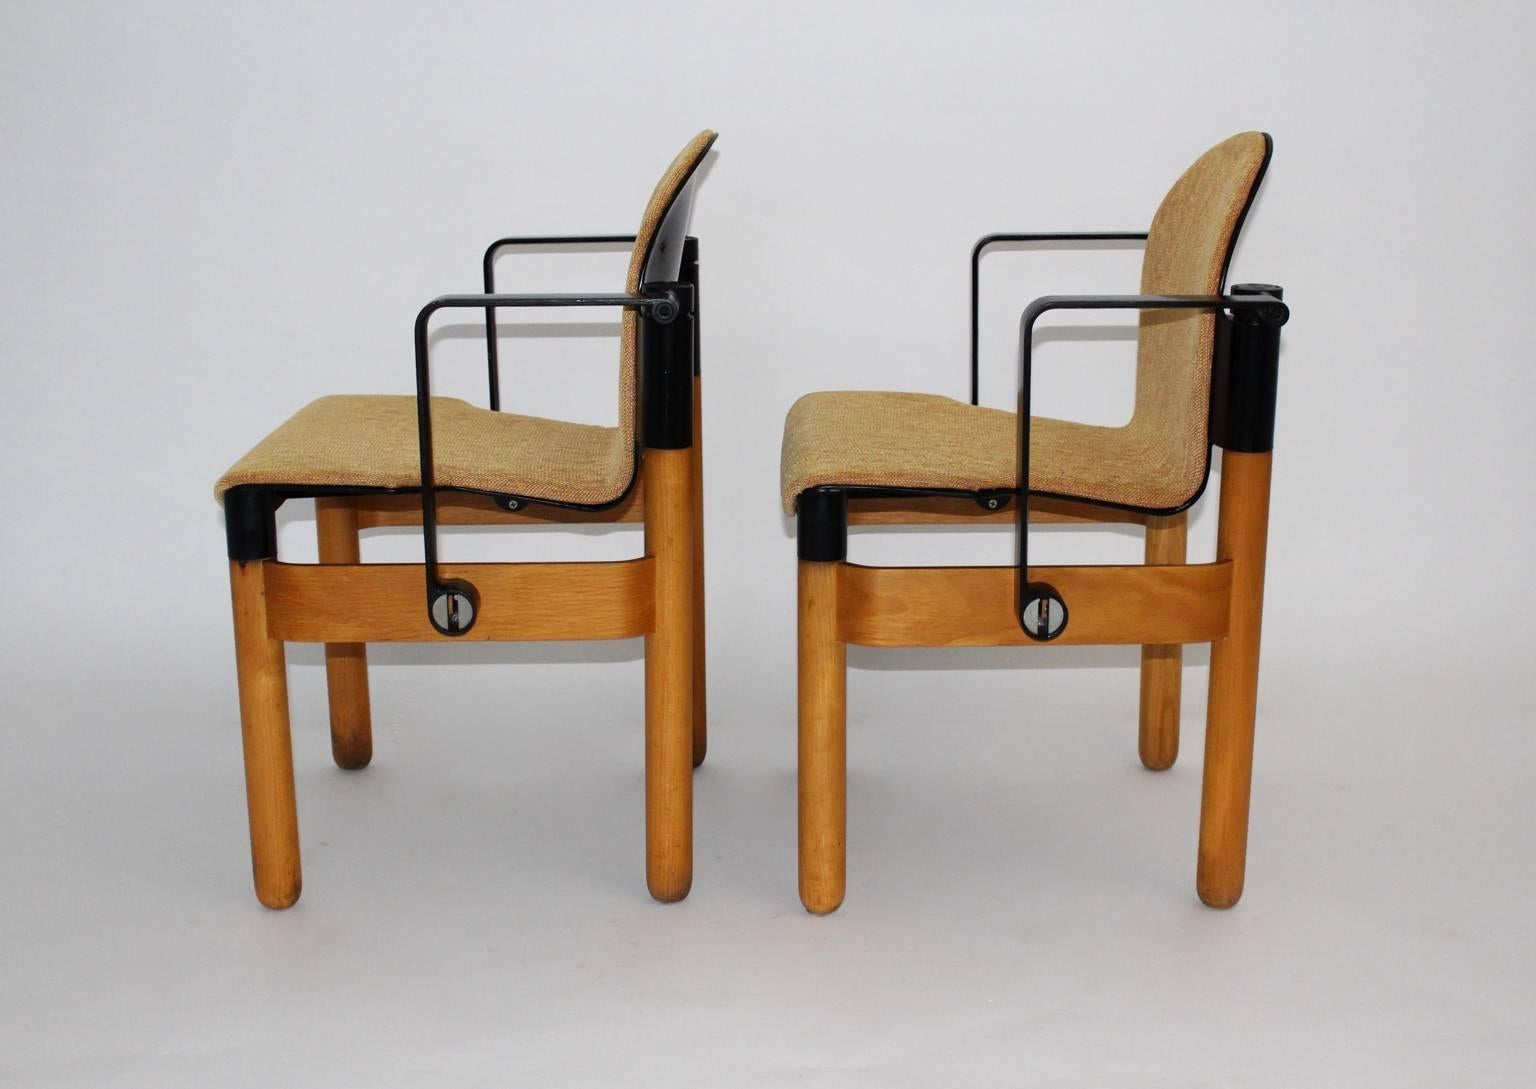 Pair of armchairs designed by Gerd Lange, 1973, Germany, and produced by Thonet.

The legs are made of solid ashwood, the frame is made of ashwood bentwood.
The armrests are made of aluminium black lacquered. The seat consists of PVC, newly